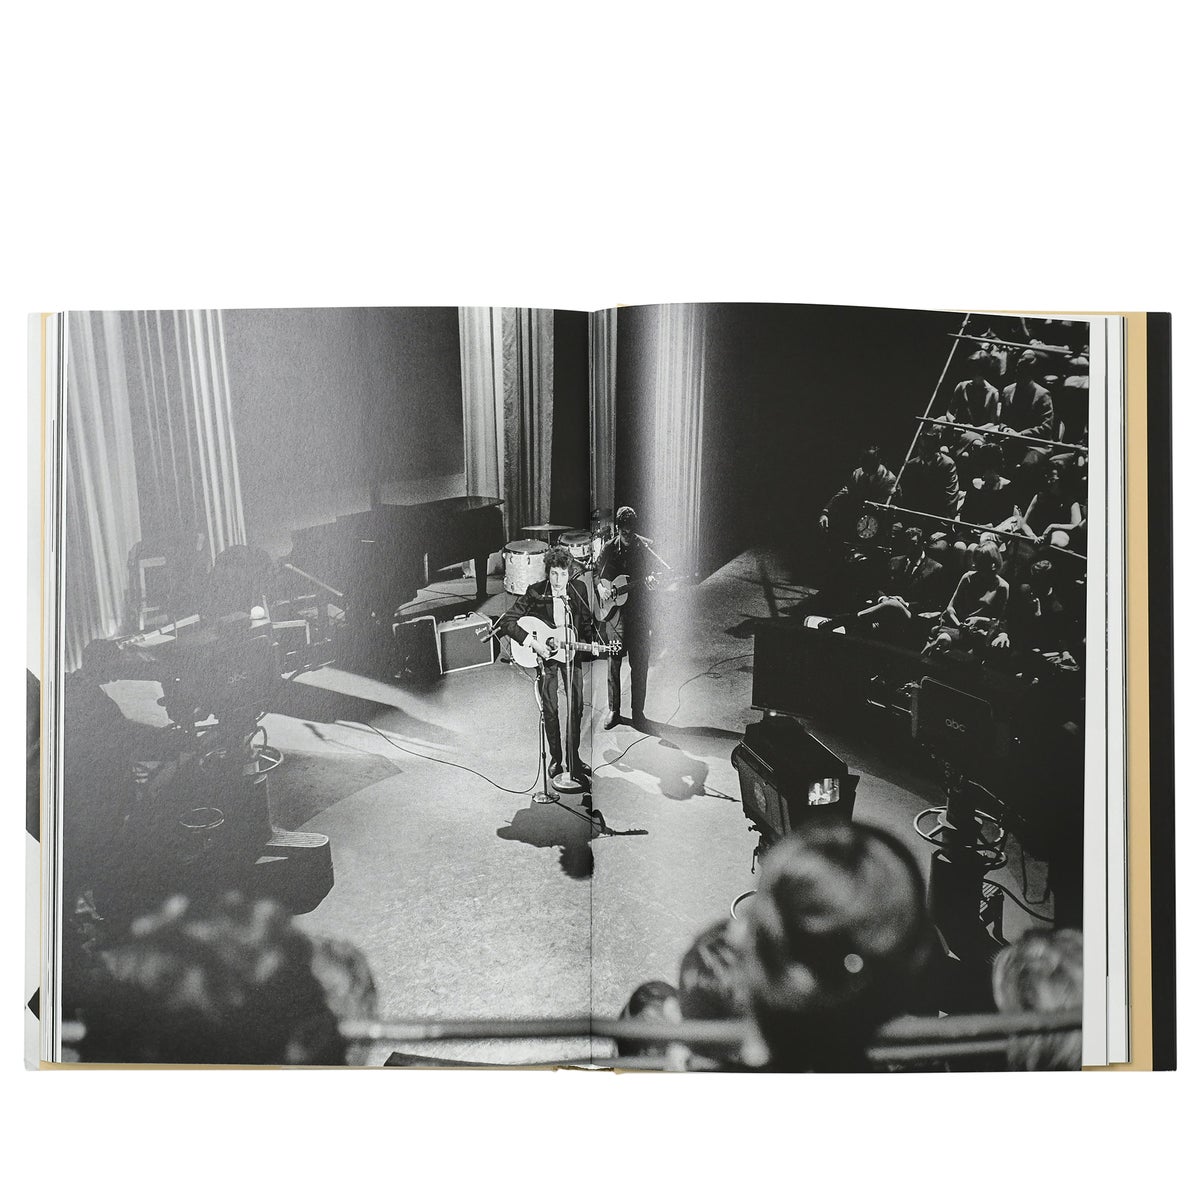 TASCHEN - BOB DYLAN - A YEAR AND A DAY BOOK